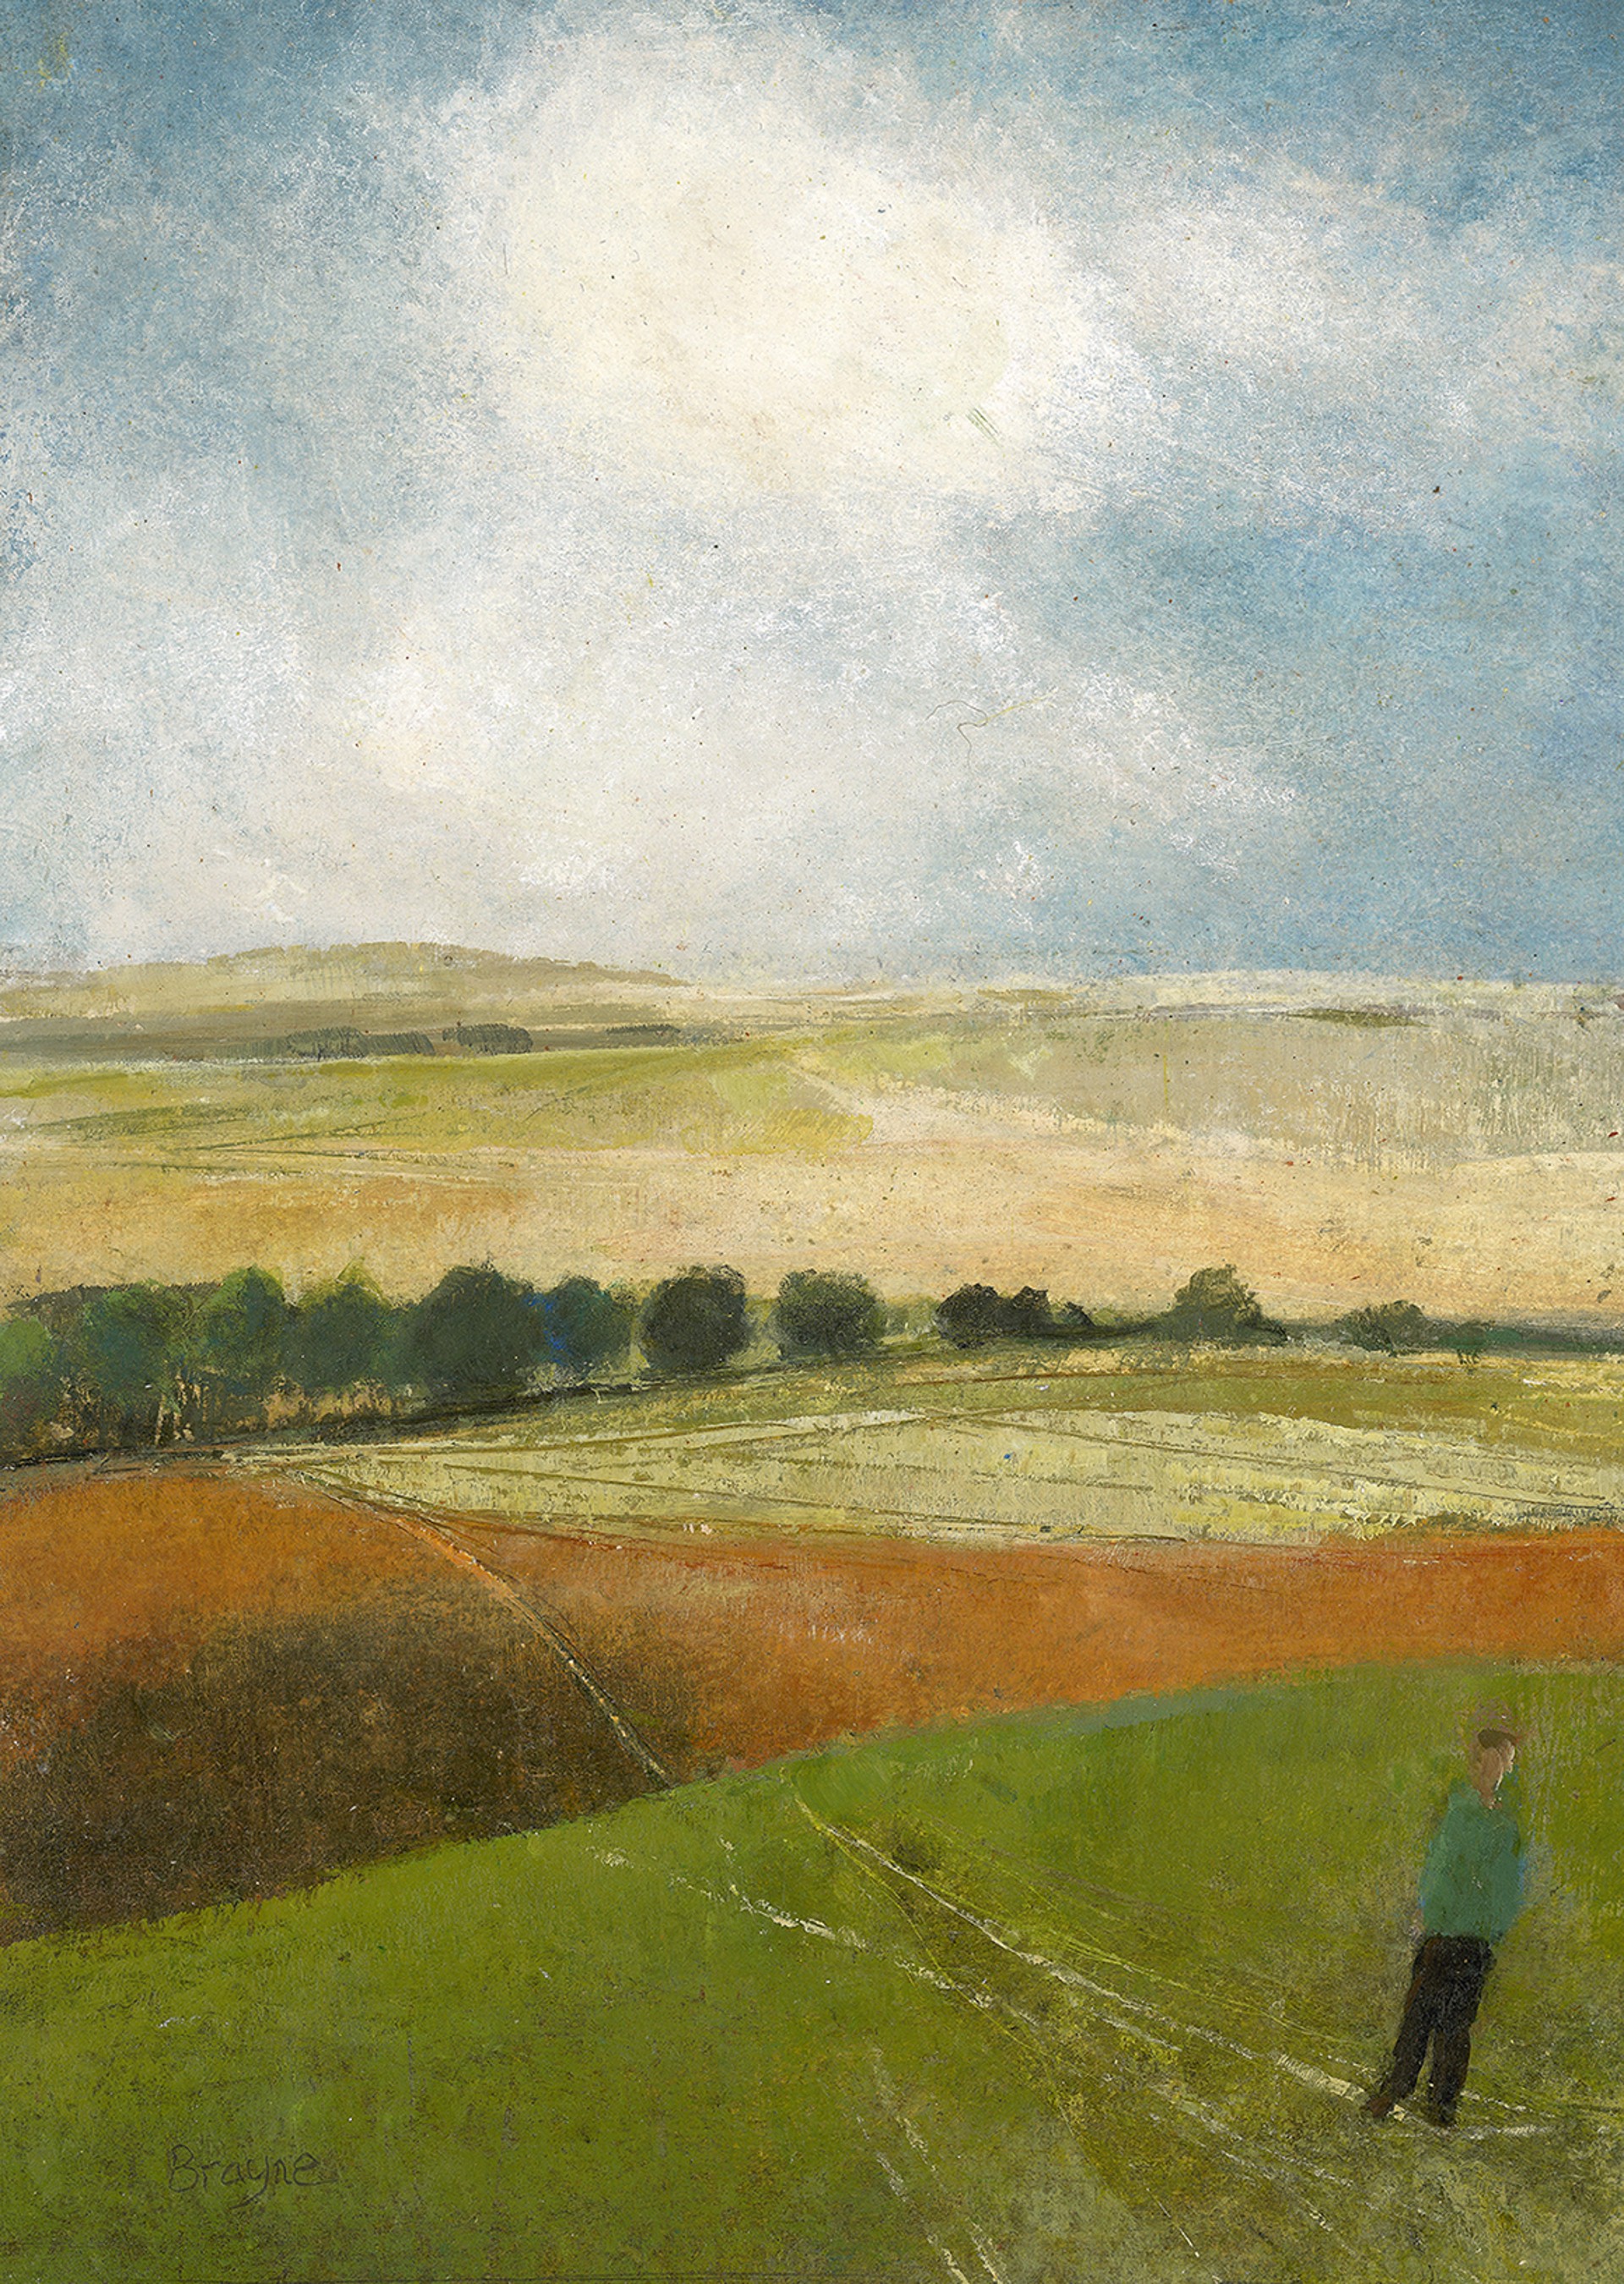 The Dry Hill Track to Ham by David Brayne R.W.S.